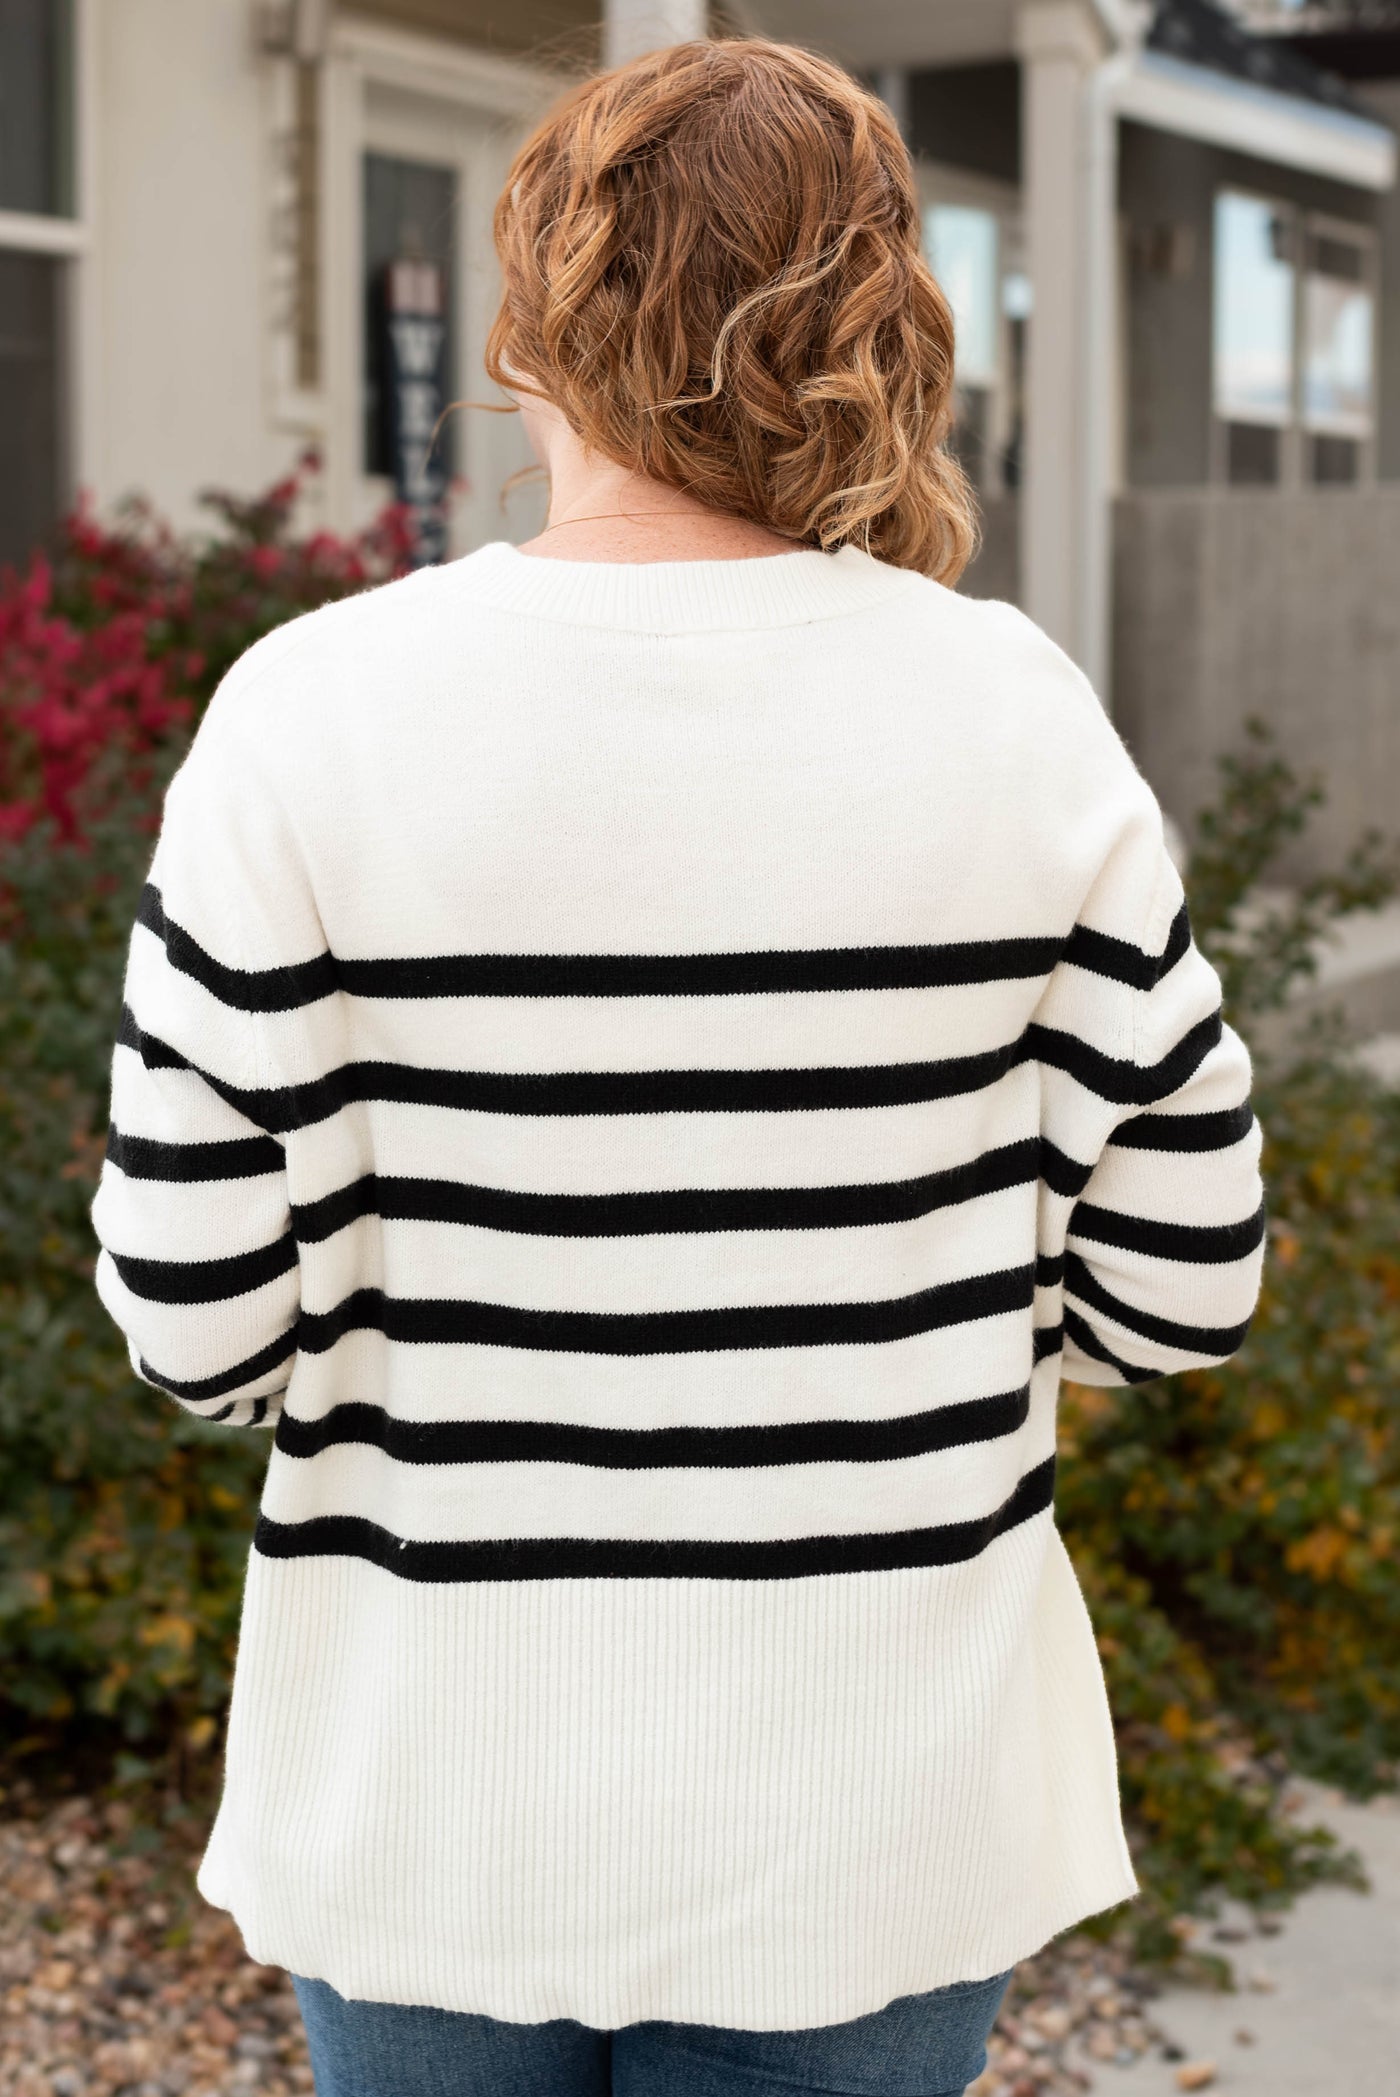 Back view of the striped sweater